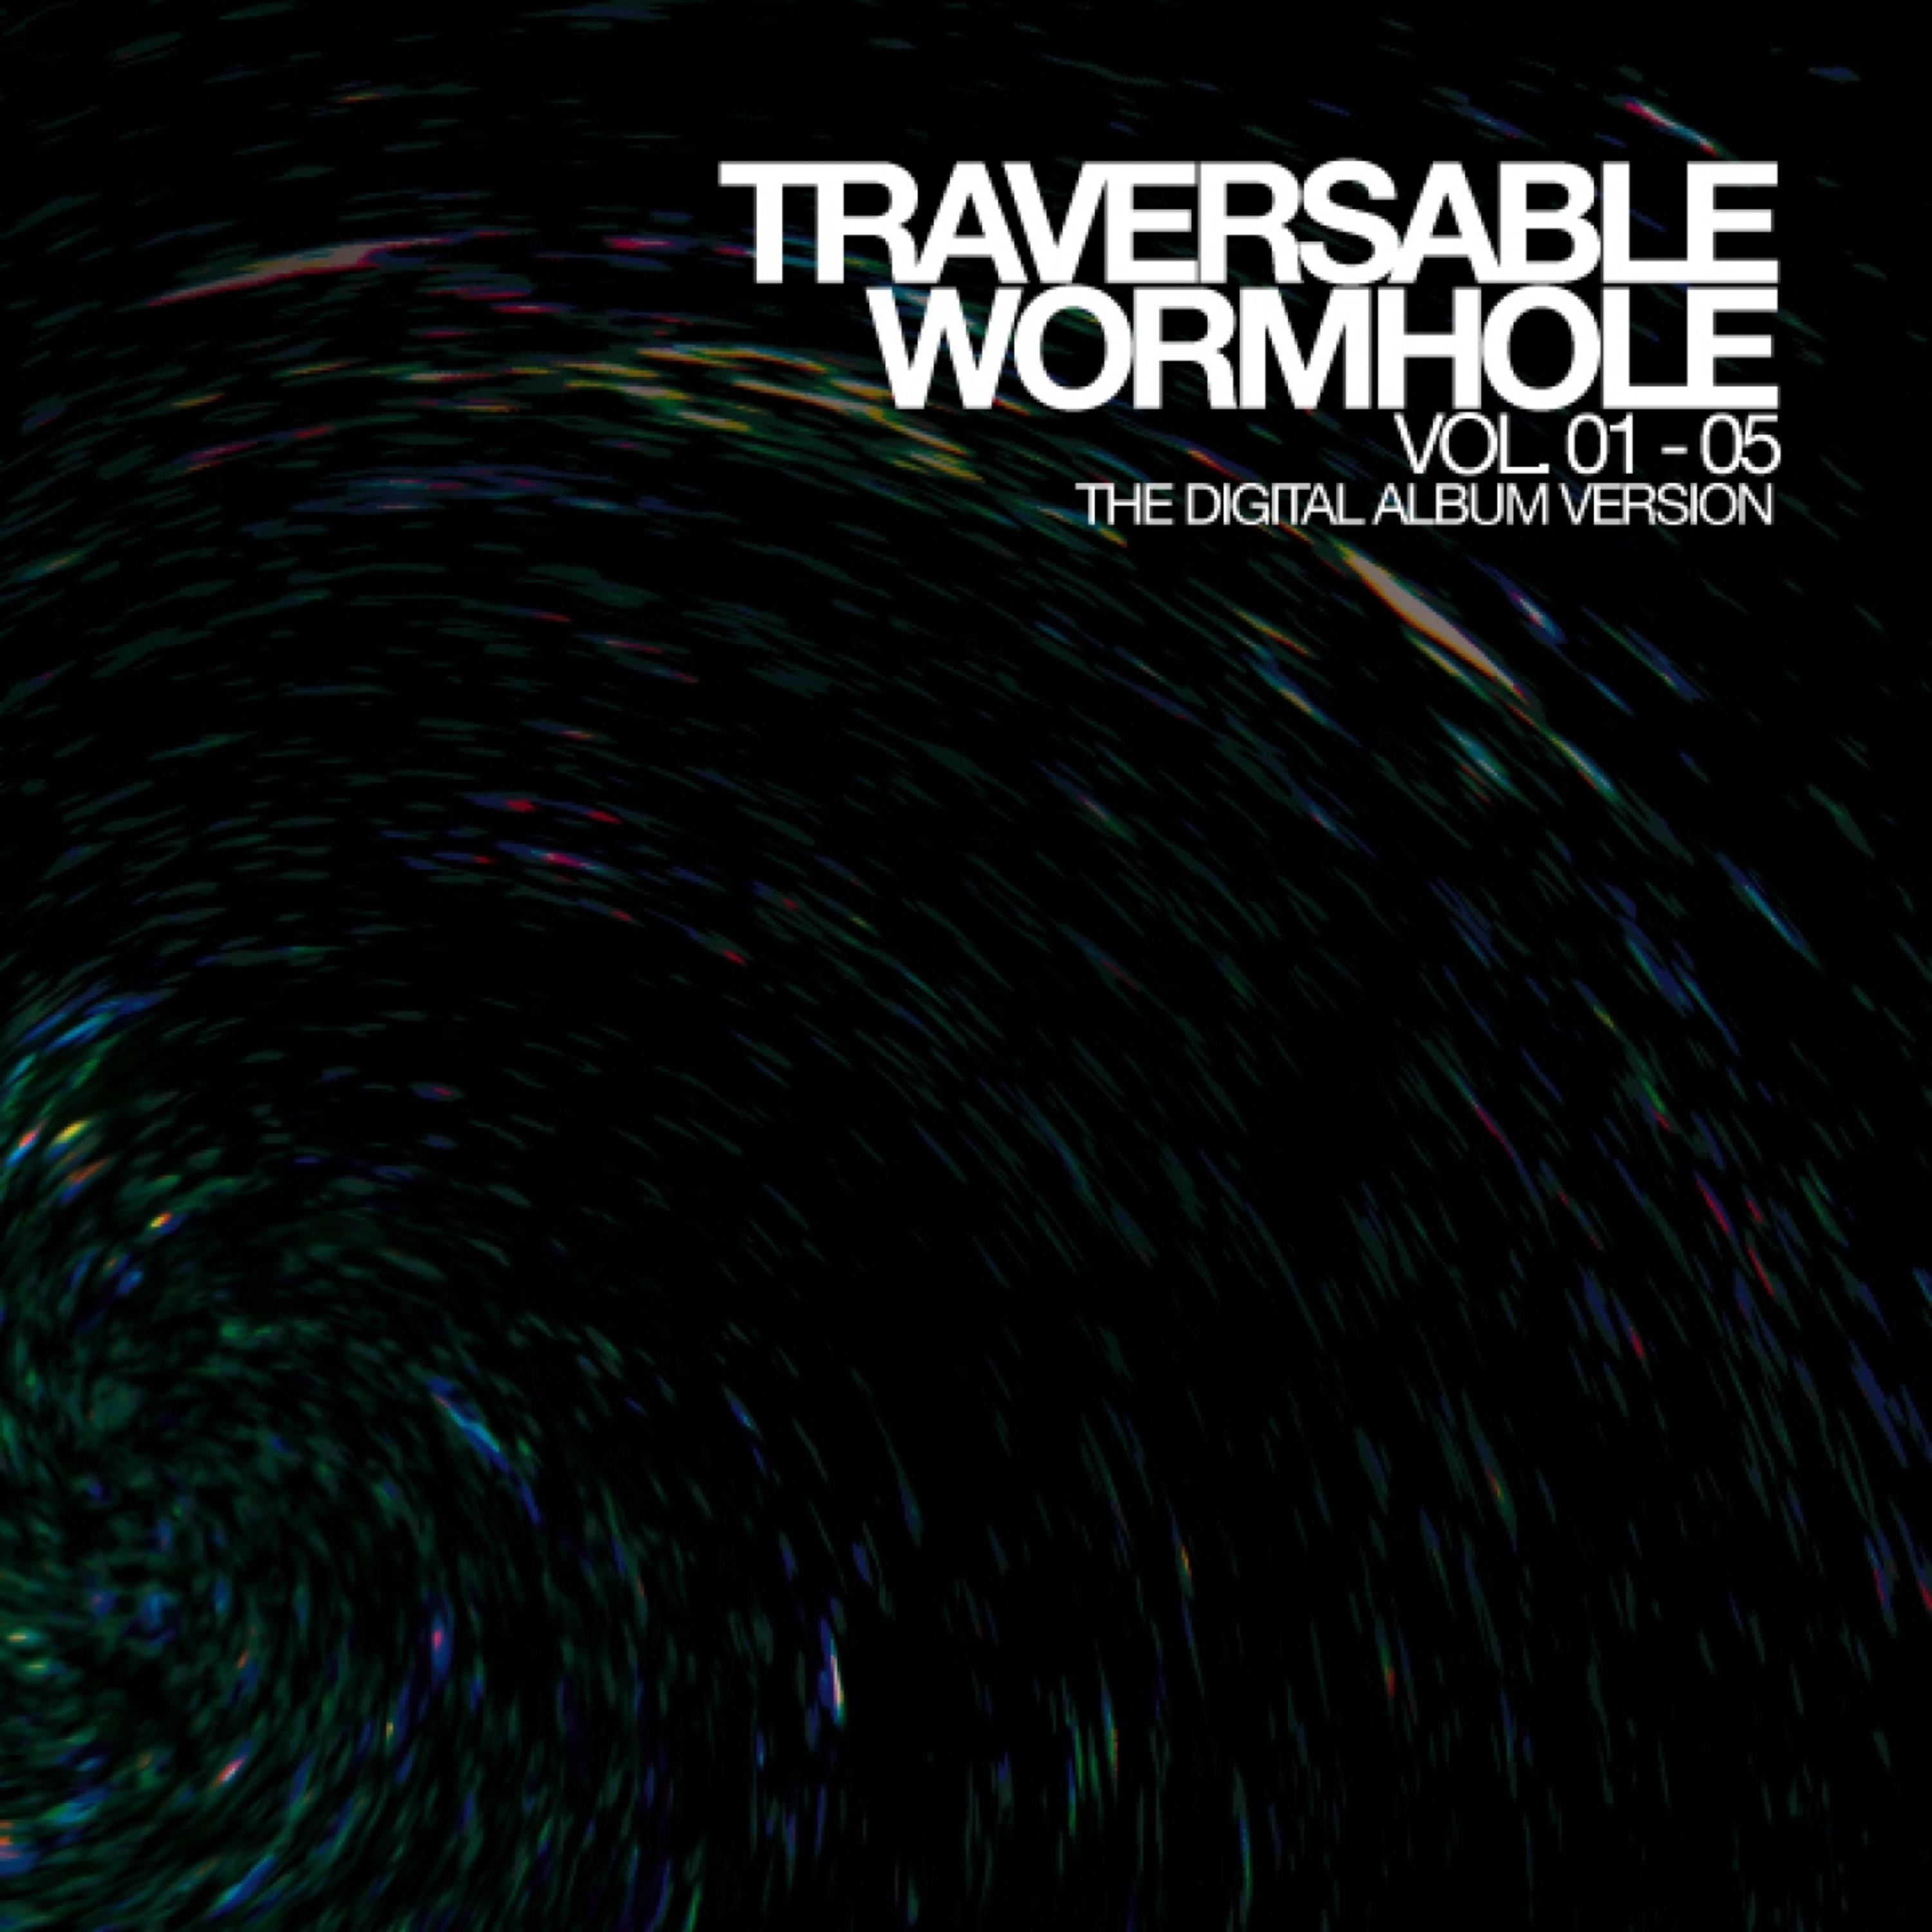 Traversable Wormhole - The Remixes - An Exclusive DJ Mix by Chris Liebing